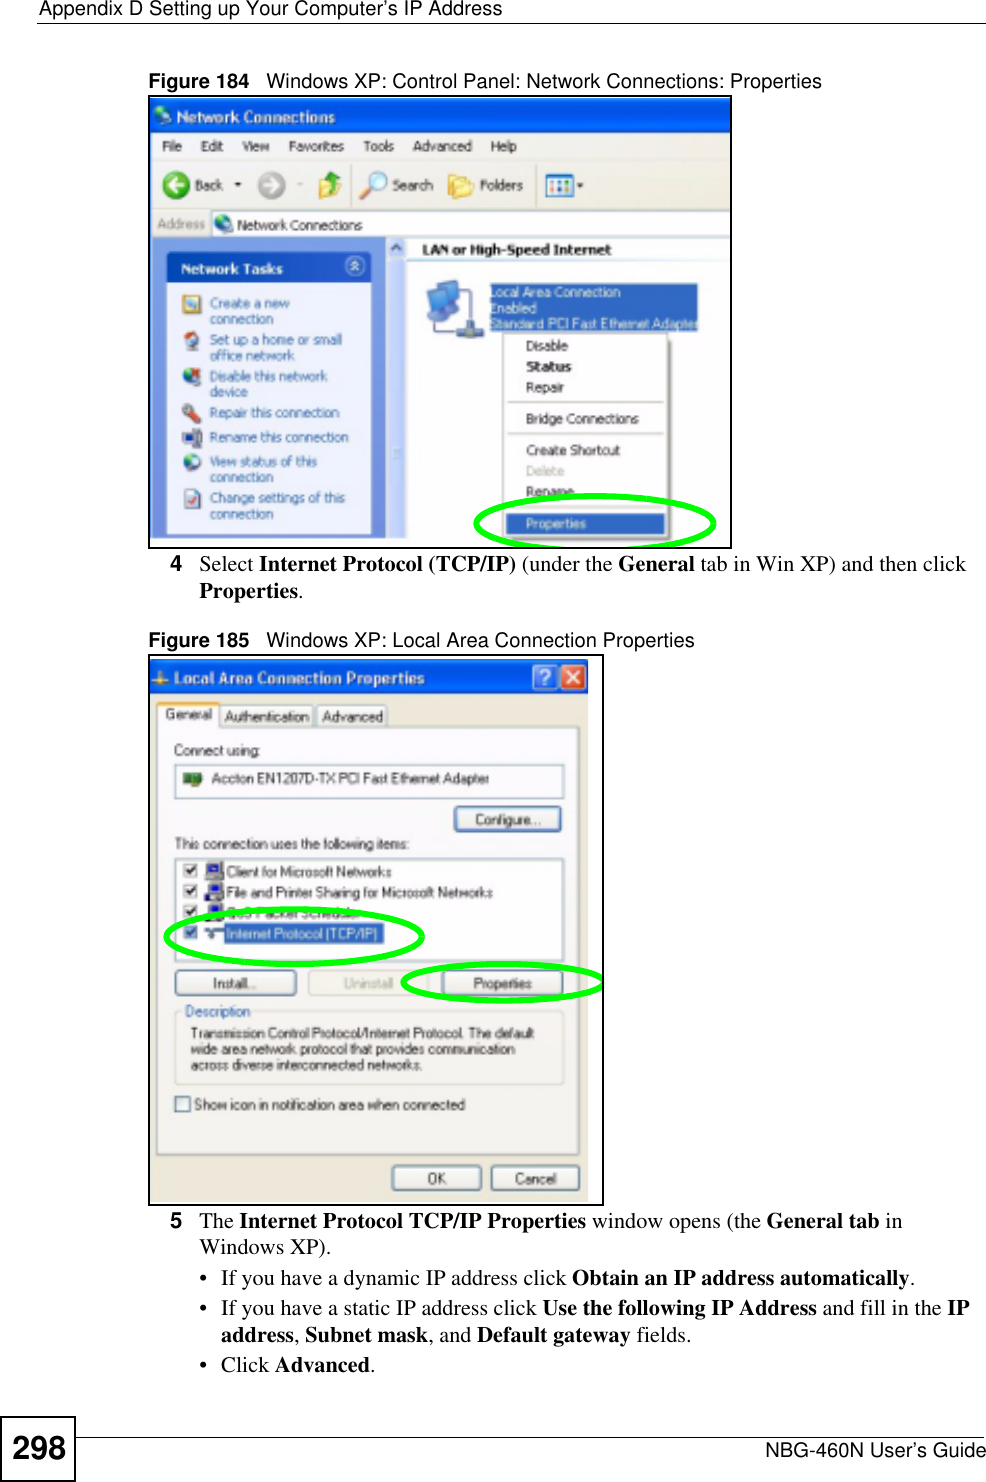 Appendix D Setting up Your Computer’s IP AddressNBG-460N User’s Guide298Figure 184   Windows XP: Control Panel: Network Connections: Properties4Select Internet Protocol (TCP/IP) (under the General tab in Win XP) and then click Properties.Figure 185   Windows XP: Local Area Connection Properties5The Internet Protocol TCP/IP Properties window opens (the General tab in Windows XP).• If you have a dynamic IP address click Obtain an IP address automatically.• If you have a static IP address click Use the following IP Address and fill in the IPaddress,Subnet mask, and Default gateway fields. • Click Advanced.